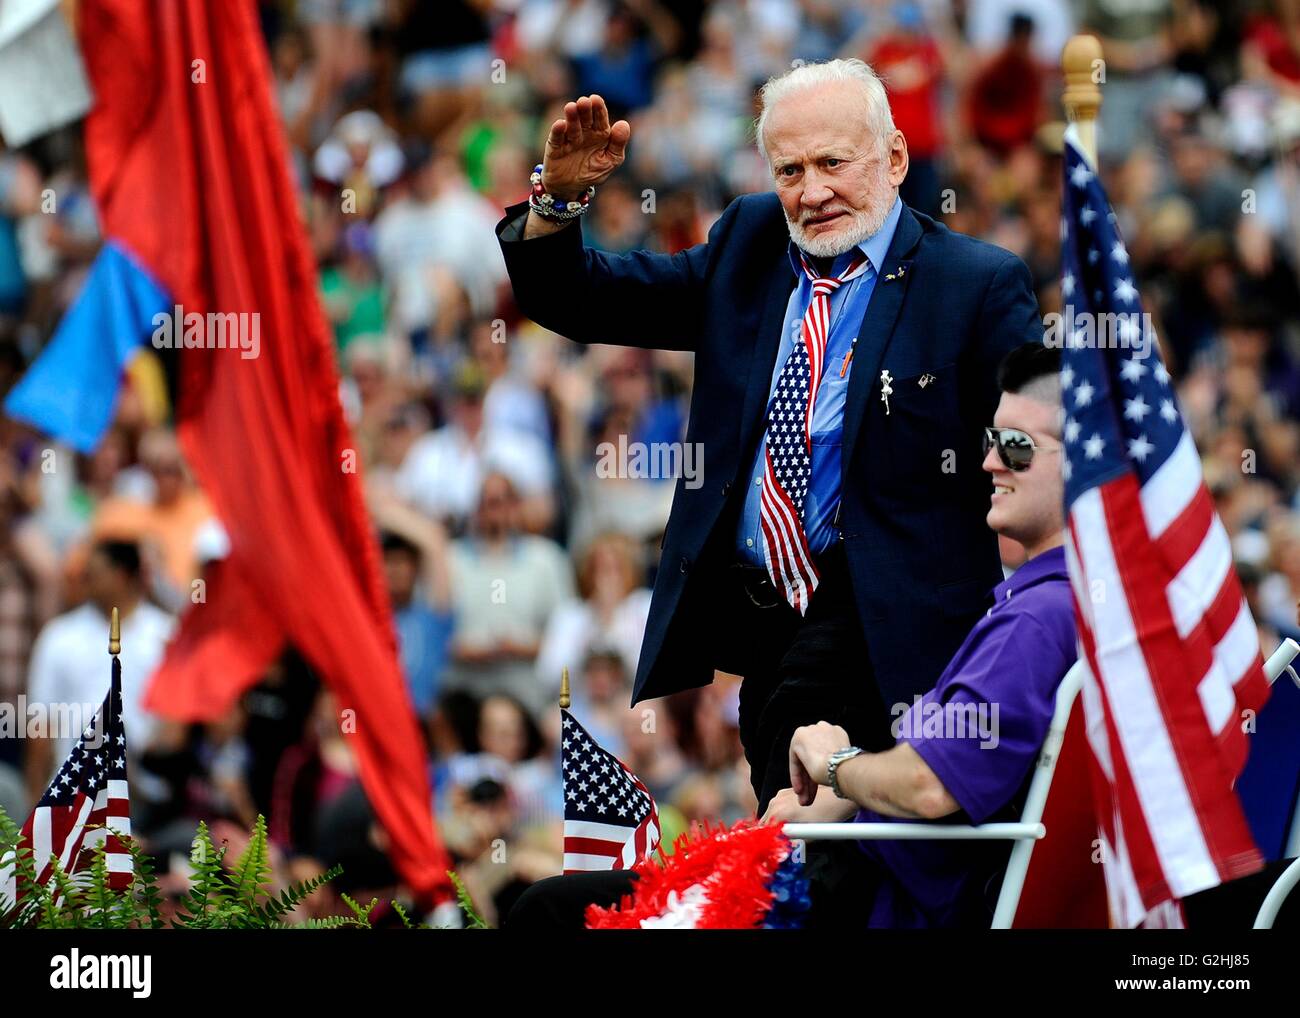 Washington DC, USA. 30th May, 2016. NASA Astronaut Buzz Aldrin waves  during The American Veterans Center National Memorial Day Parade down Pennsylvania Avenue May 30, 2016 in Washington, DC. Aldrin was one of the first two humans to land on the Moon, and the second person to walk on it. Credit:  Planetpix/Alamy Live News Stock Photo